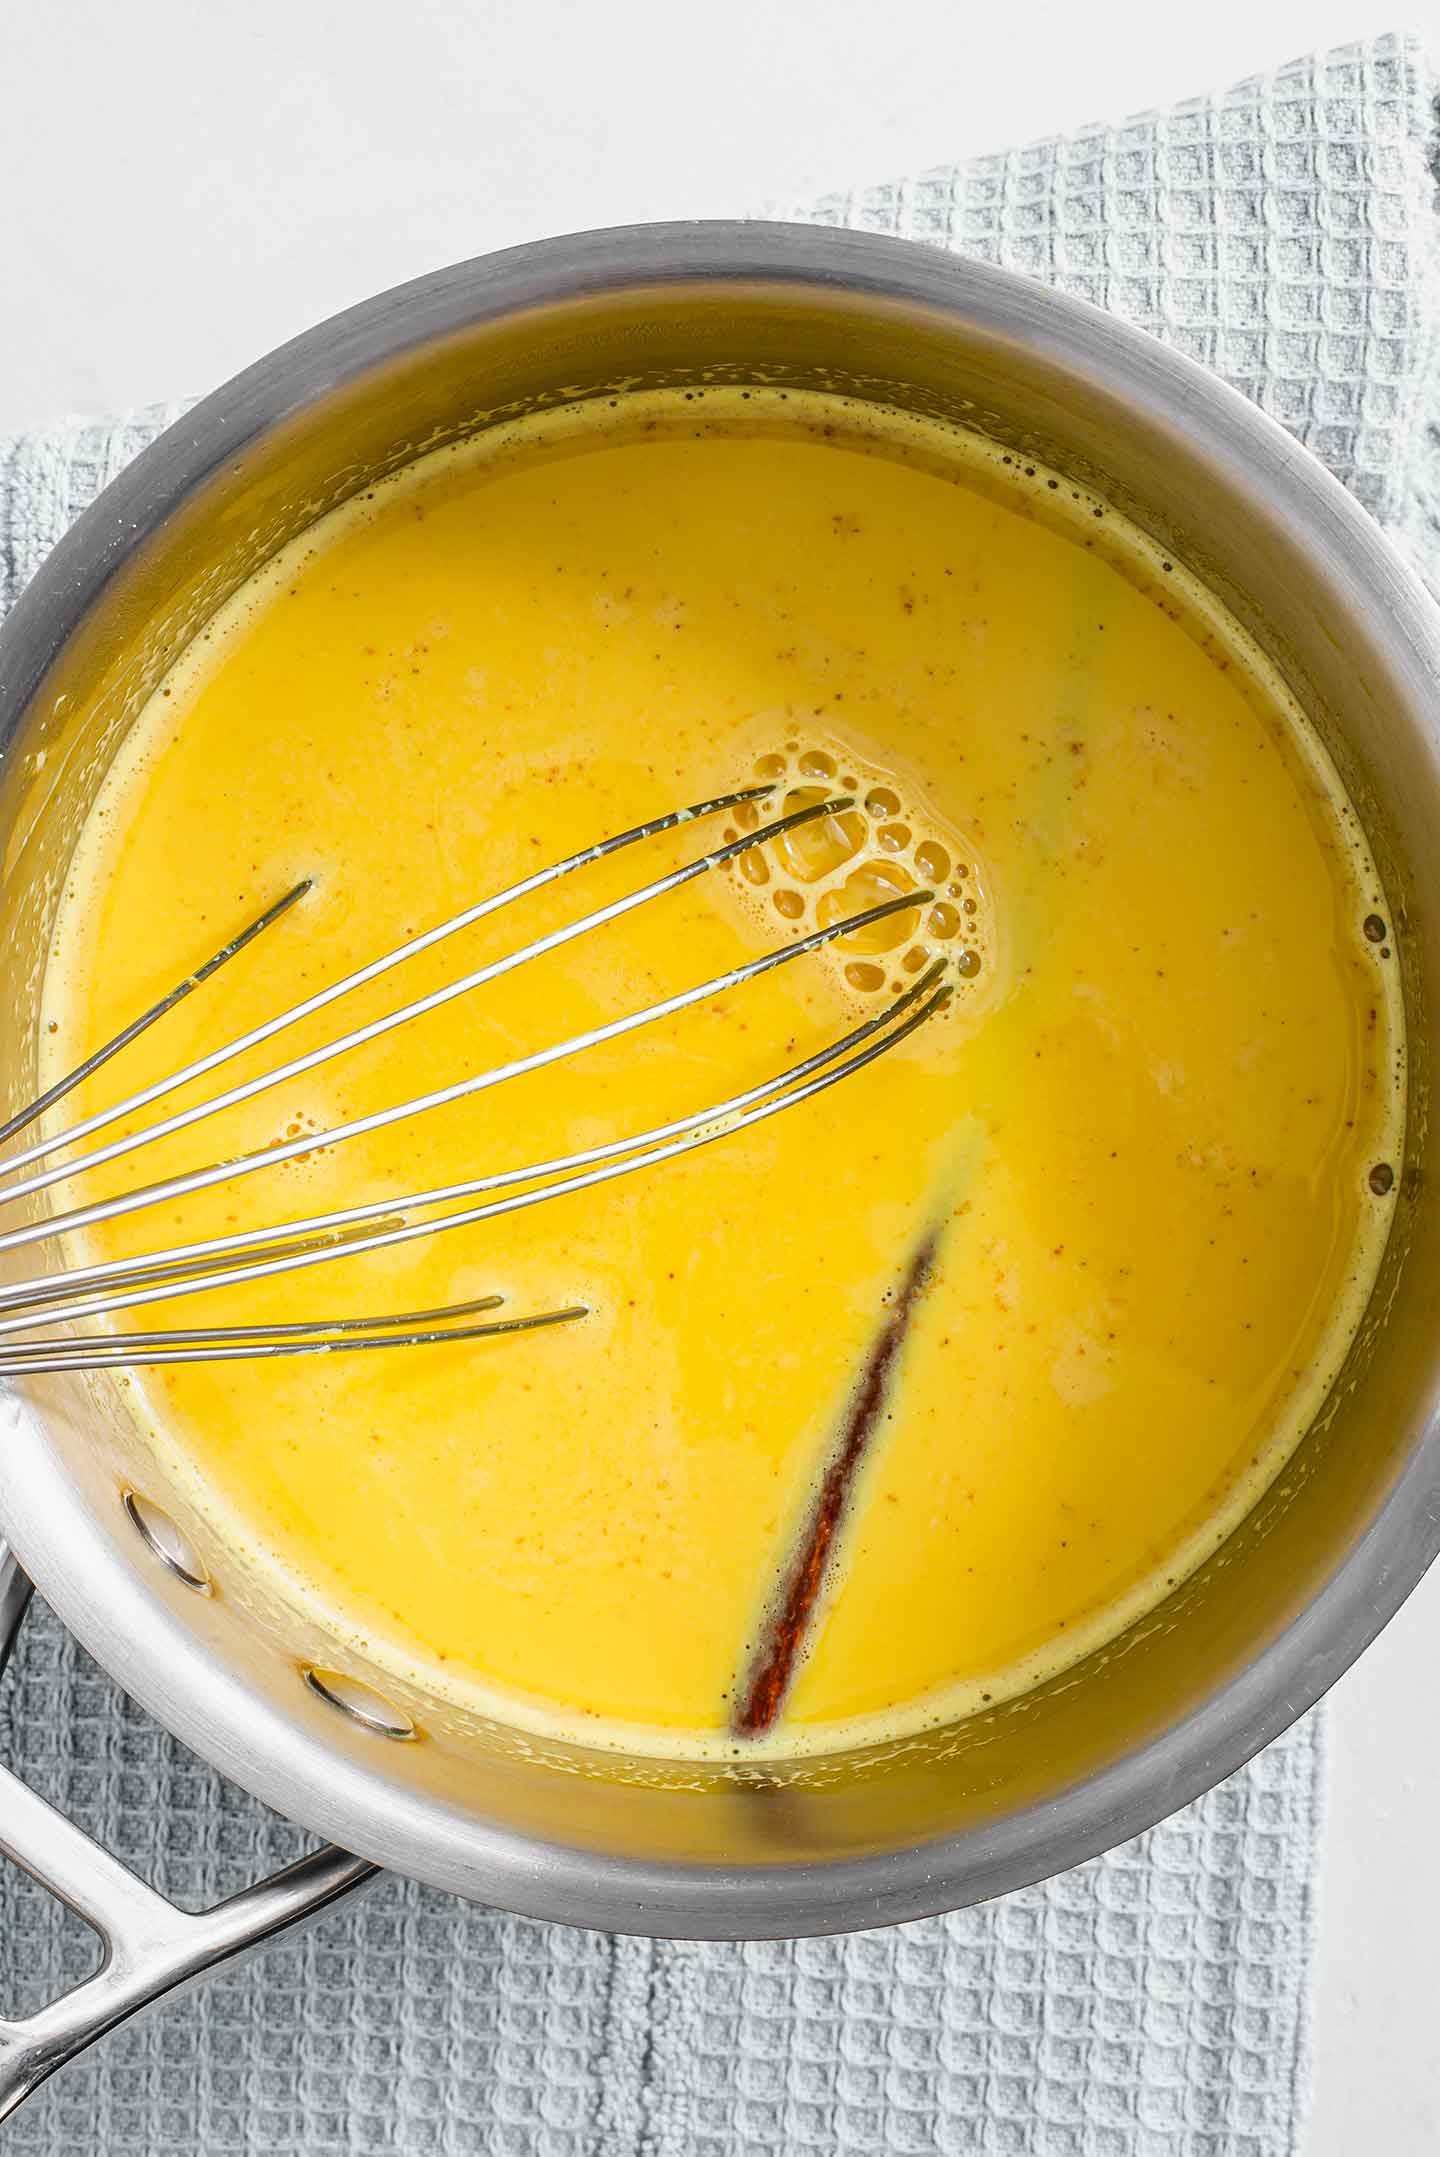 Top down view of golden milk simmering in a pot. A cinnamon stick is visible through the vibrant yellow drink and a whisk sits in the centre.